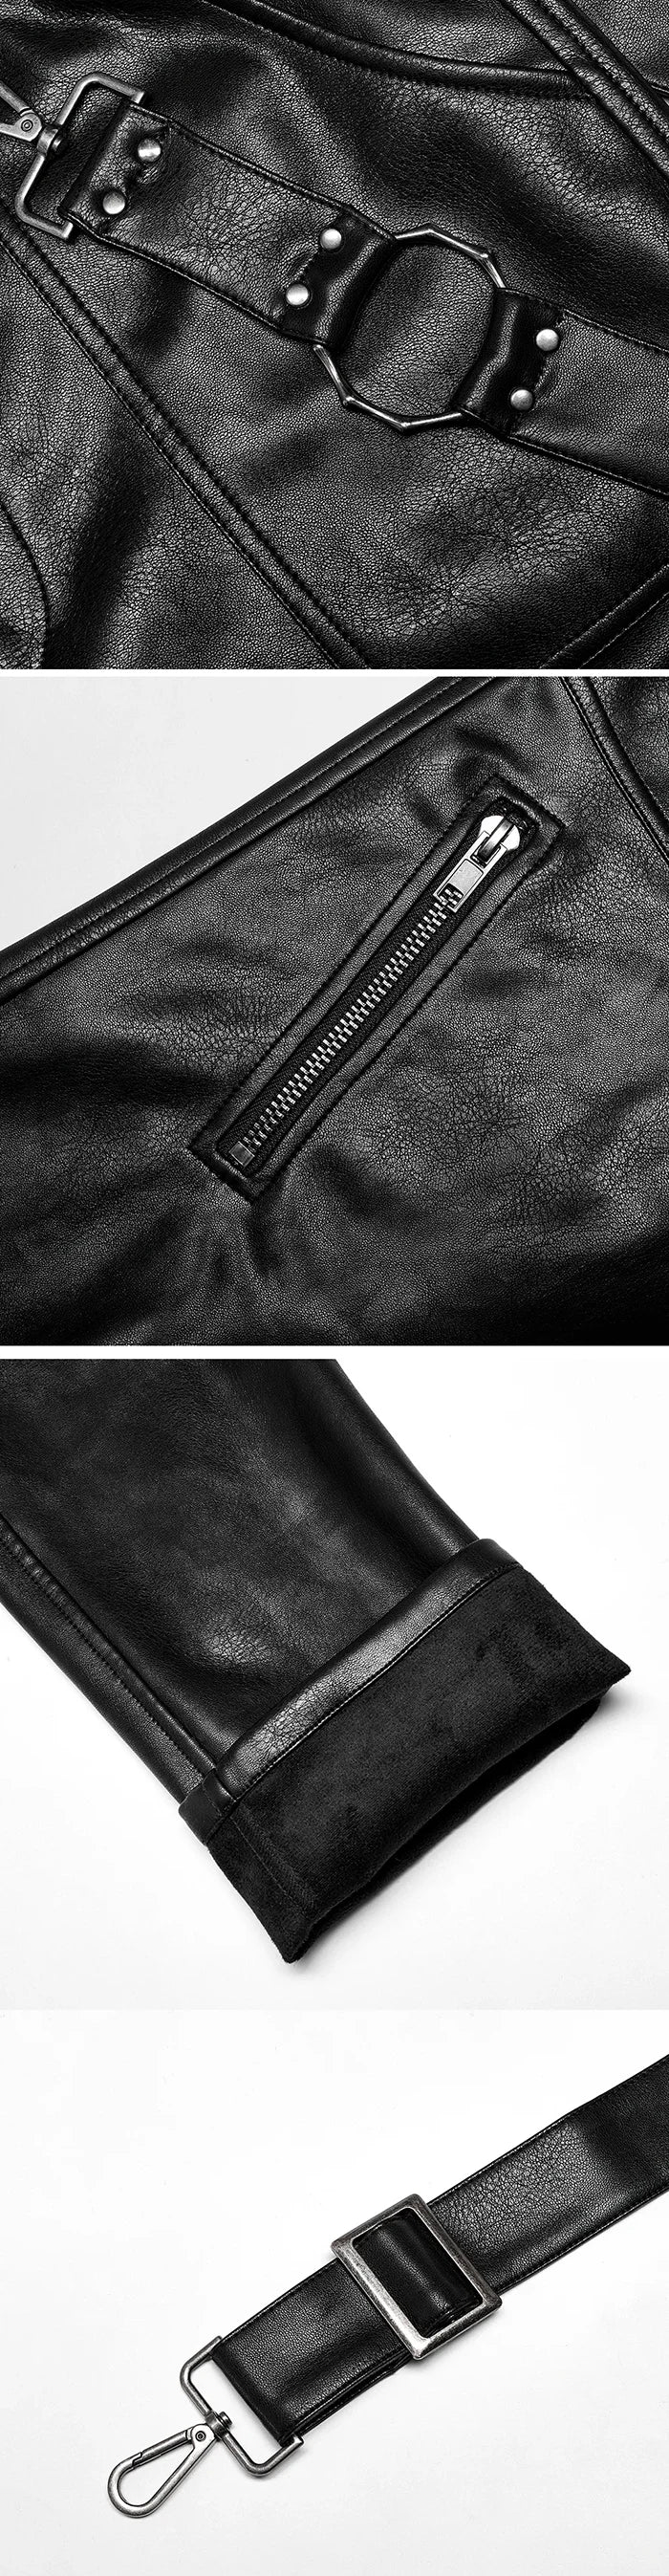 parts of the Cyberpunk leather pants "Rumo"